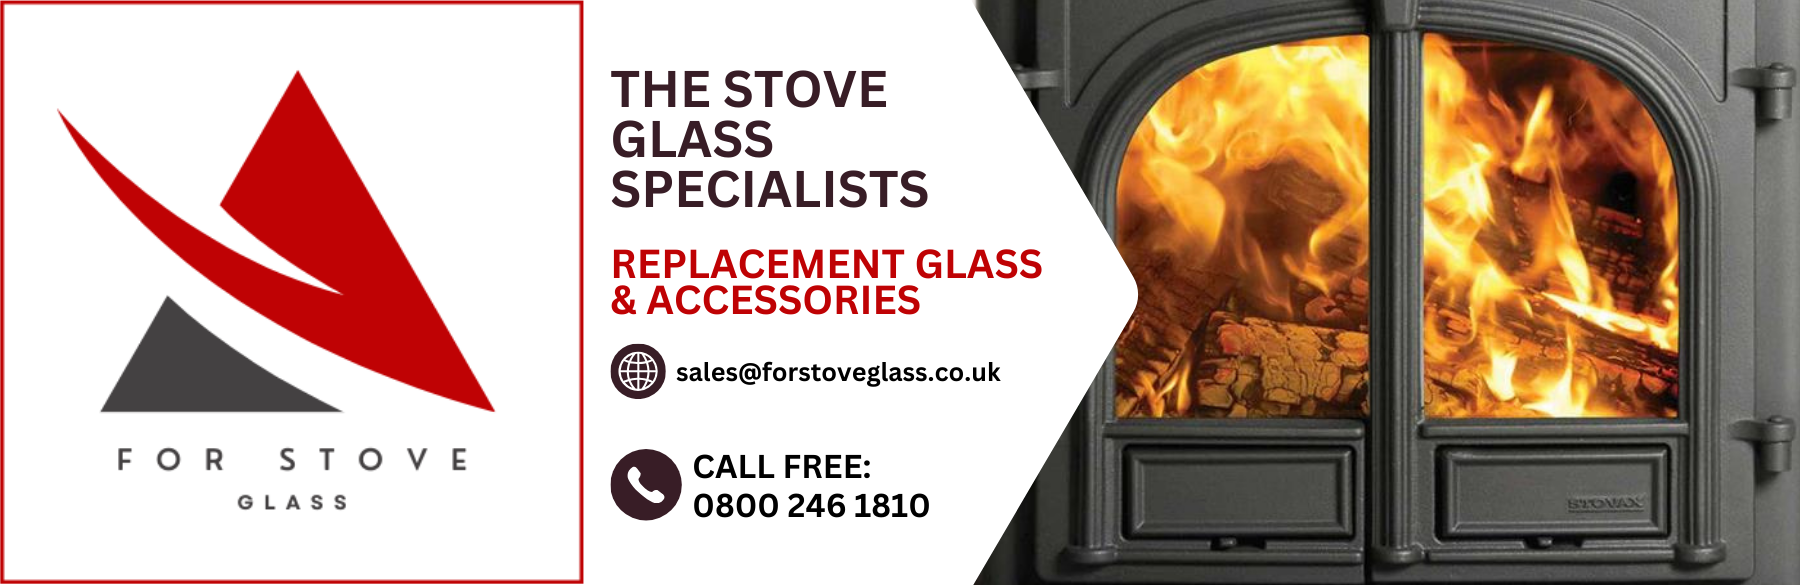 Stove Glass Products